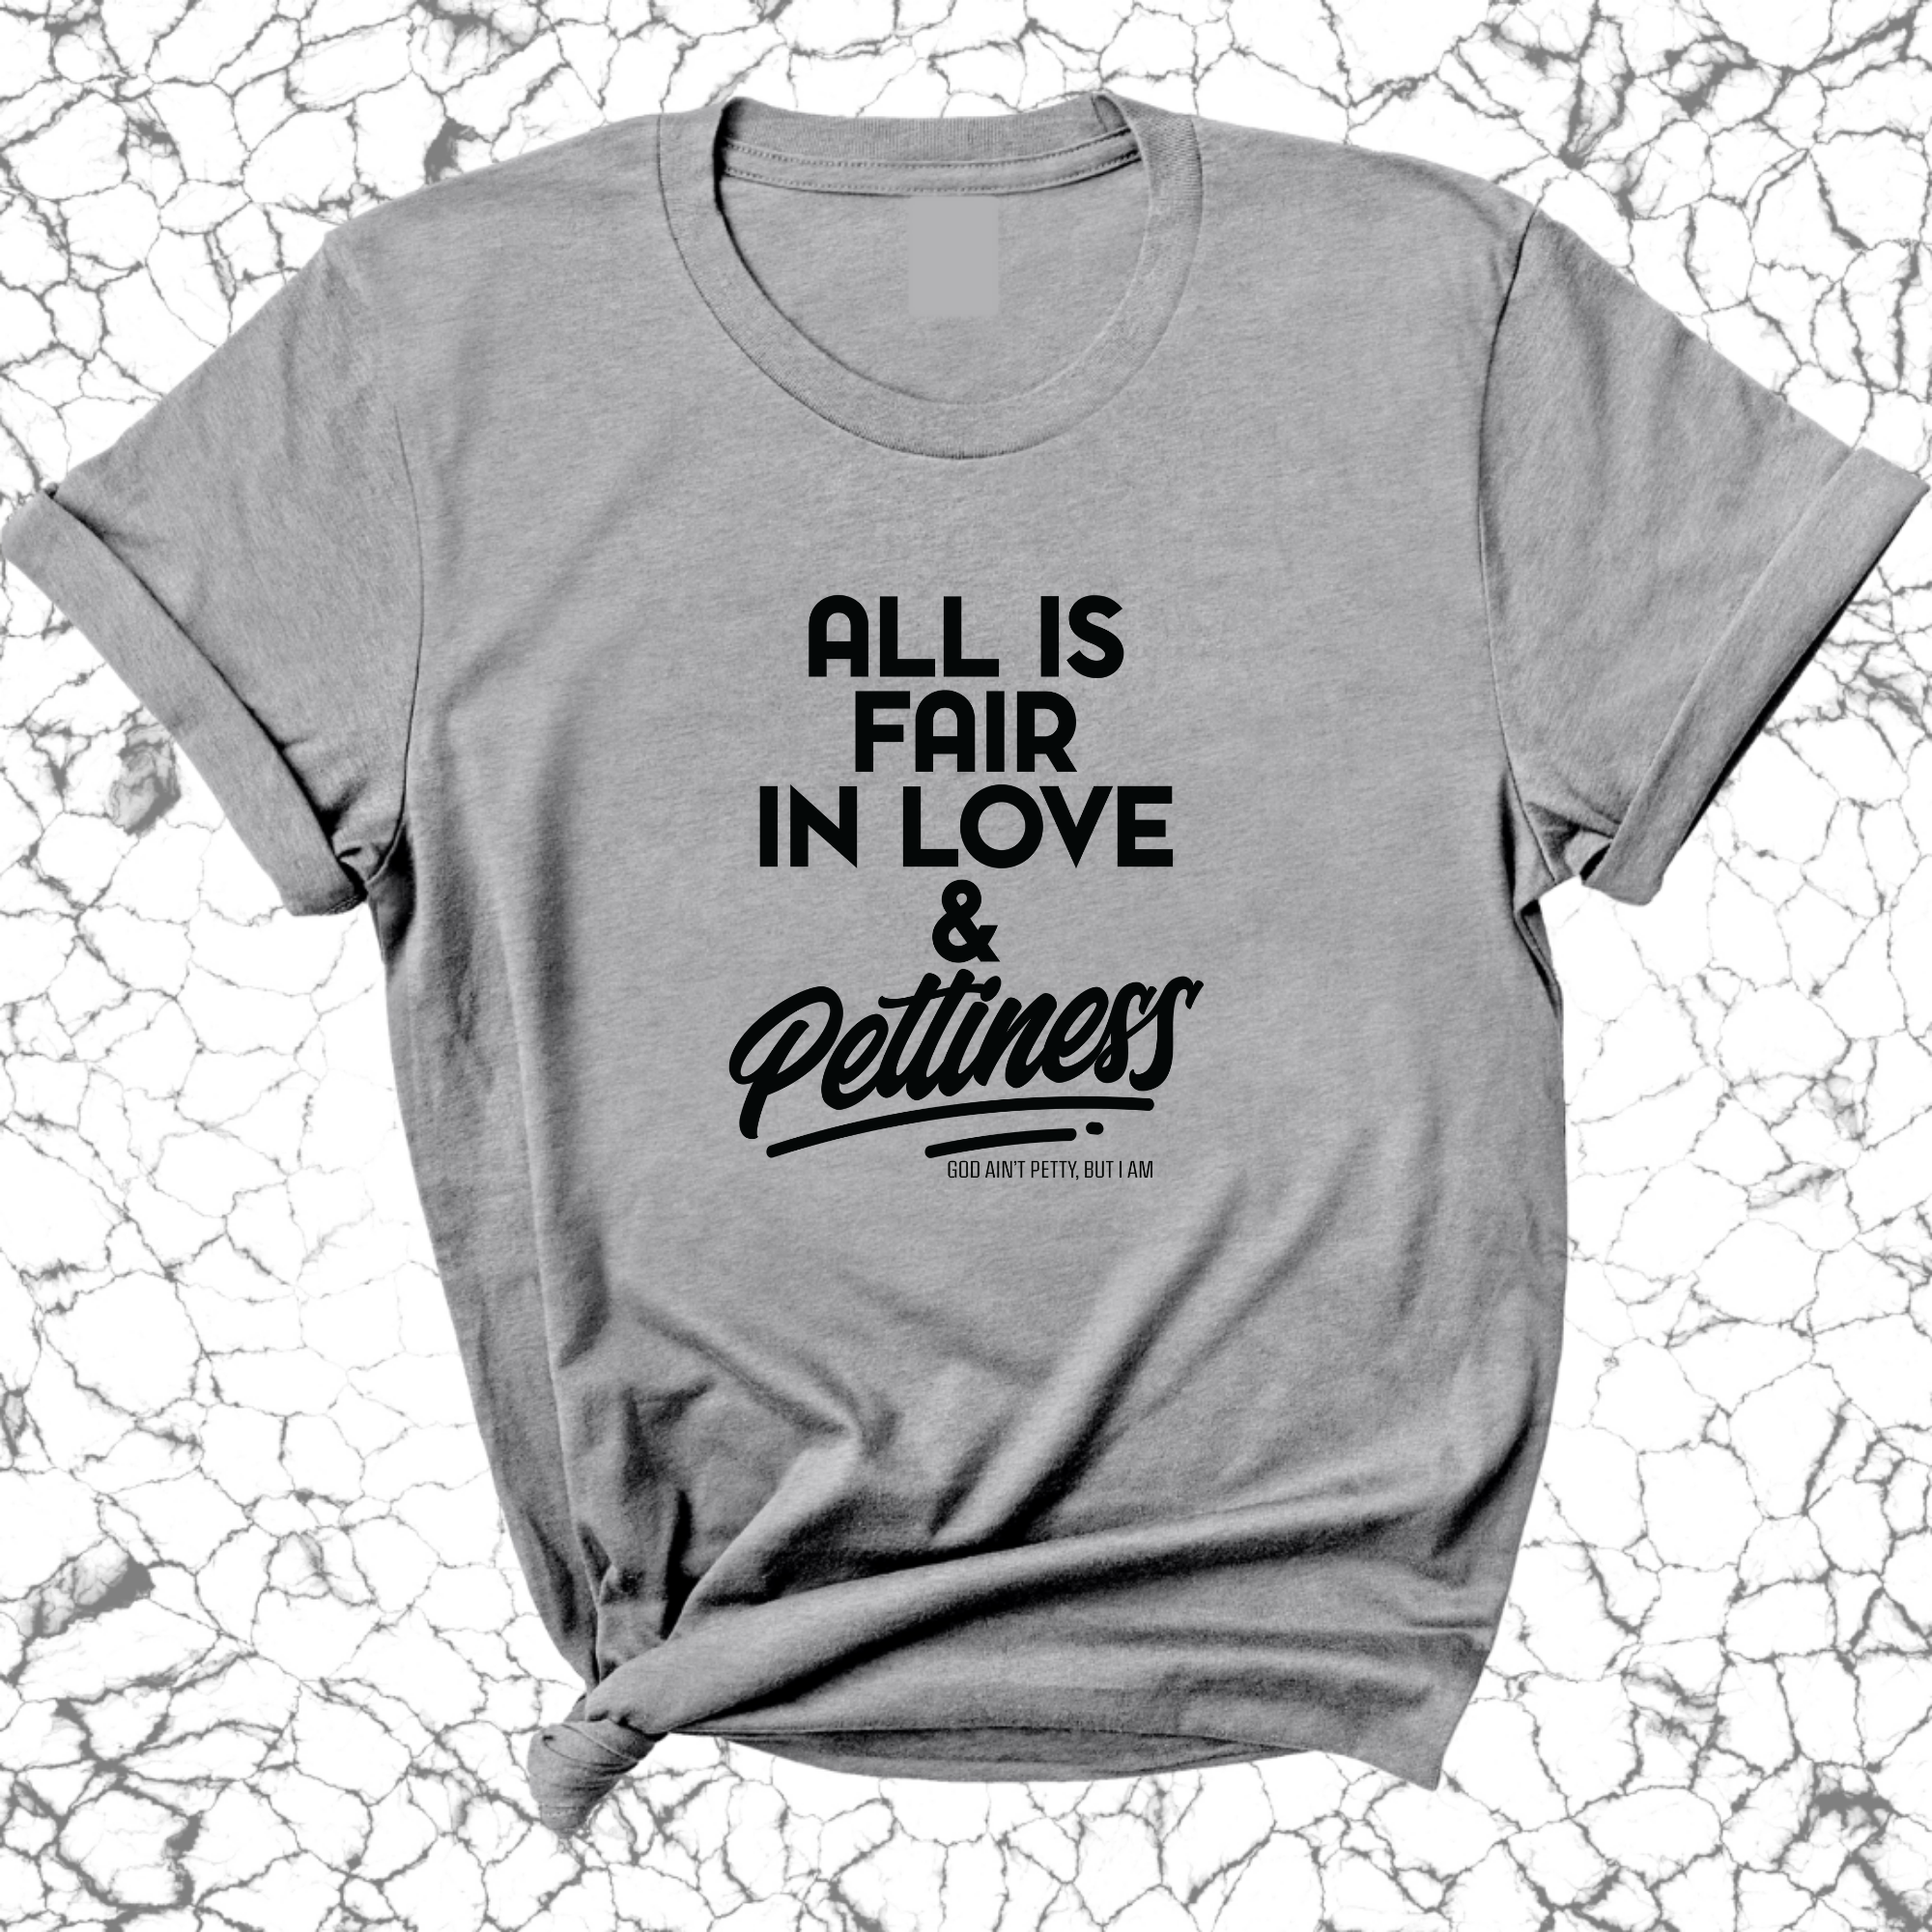 All is Fair in Love & Pettiness Unisex Tee-T-Shirt-The Original God Ain't Petty But I Am